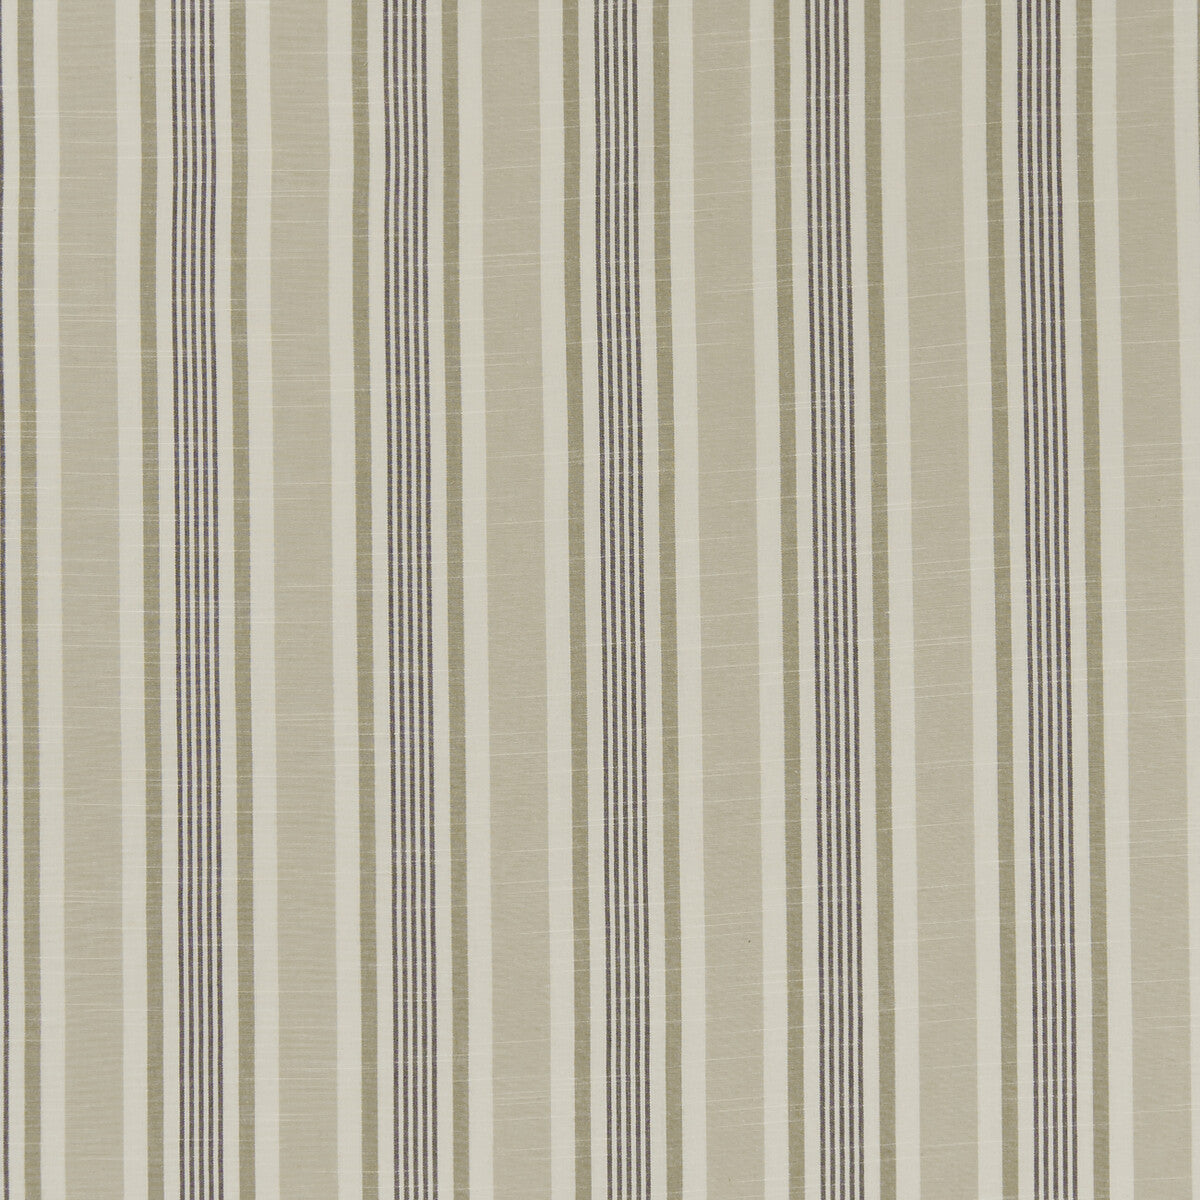 Mappleton fabric in charcoal color - pattern F1310/03.CAC.0 - by Clarke And Clarke in the Bempton By Studio G For C&amp;C collection